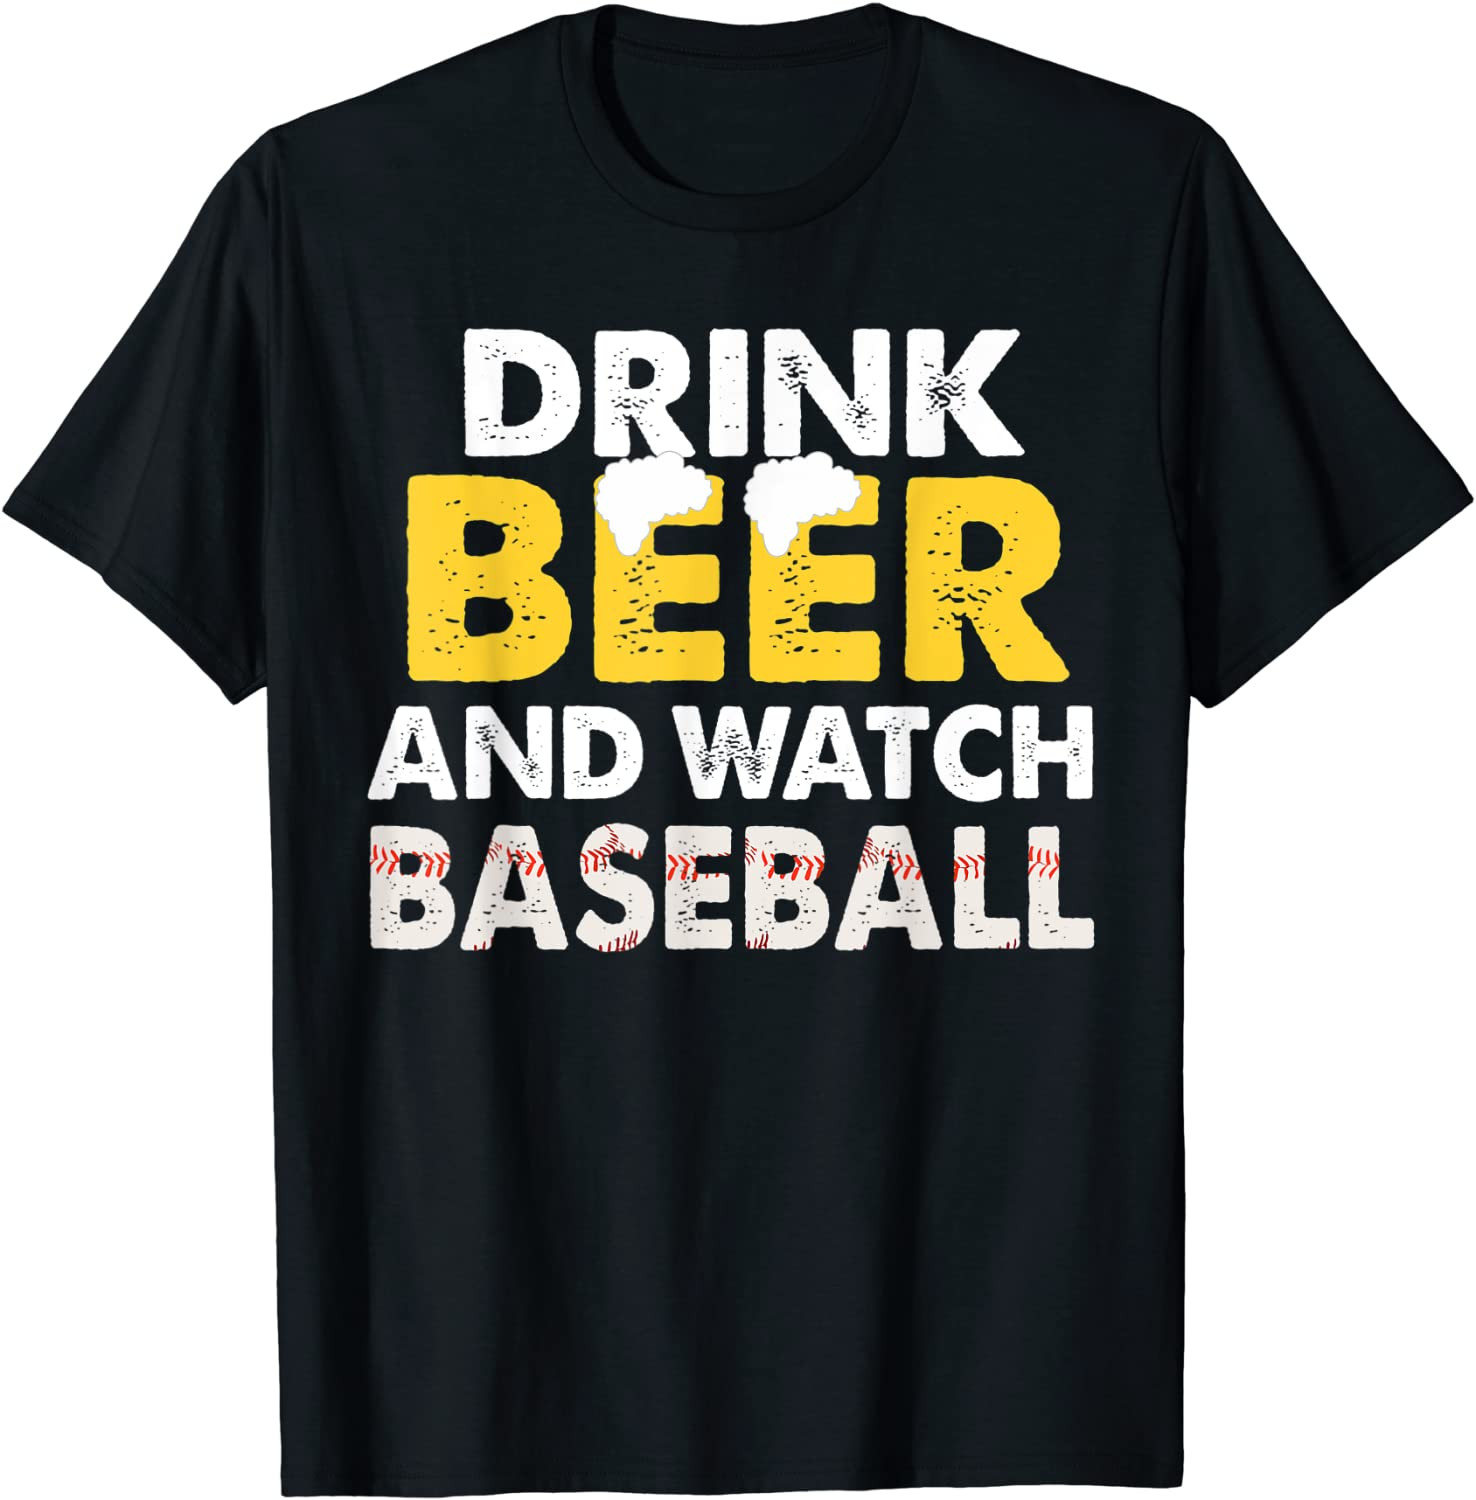 Drink Beer And Watch Baseball T-Shirt